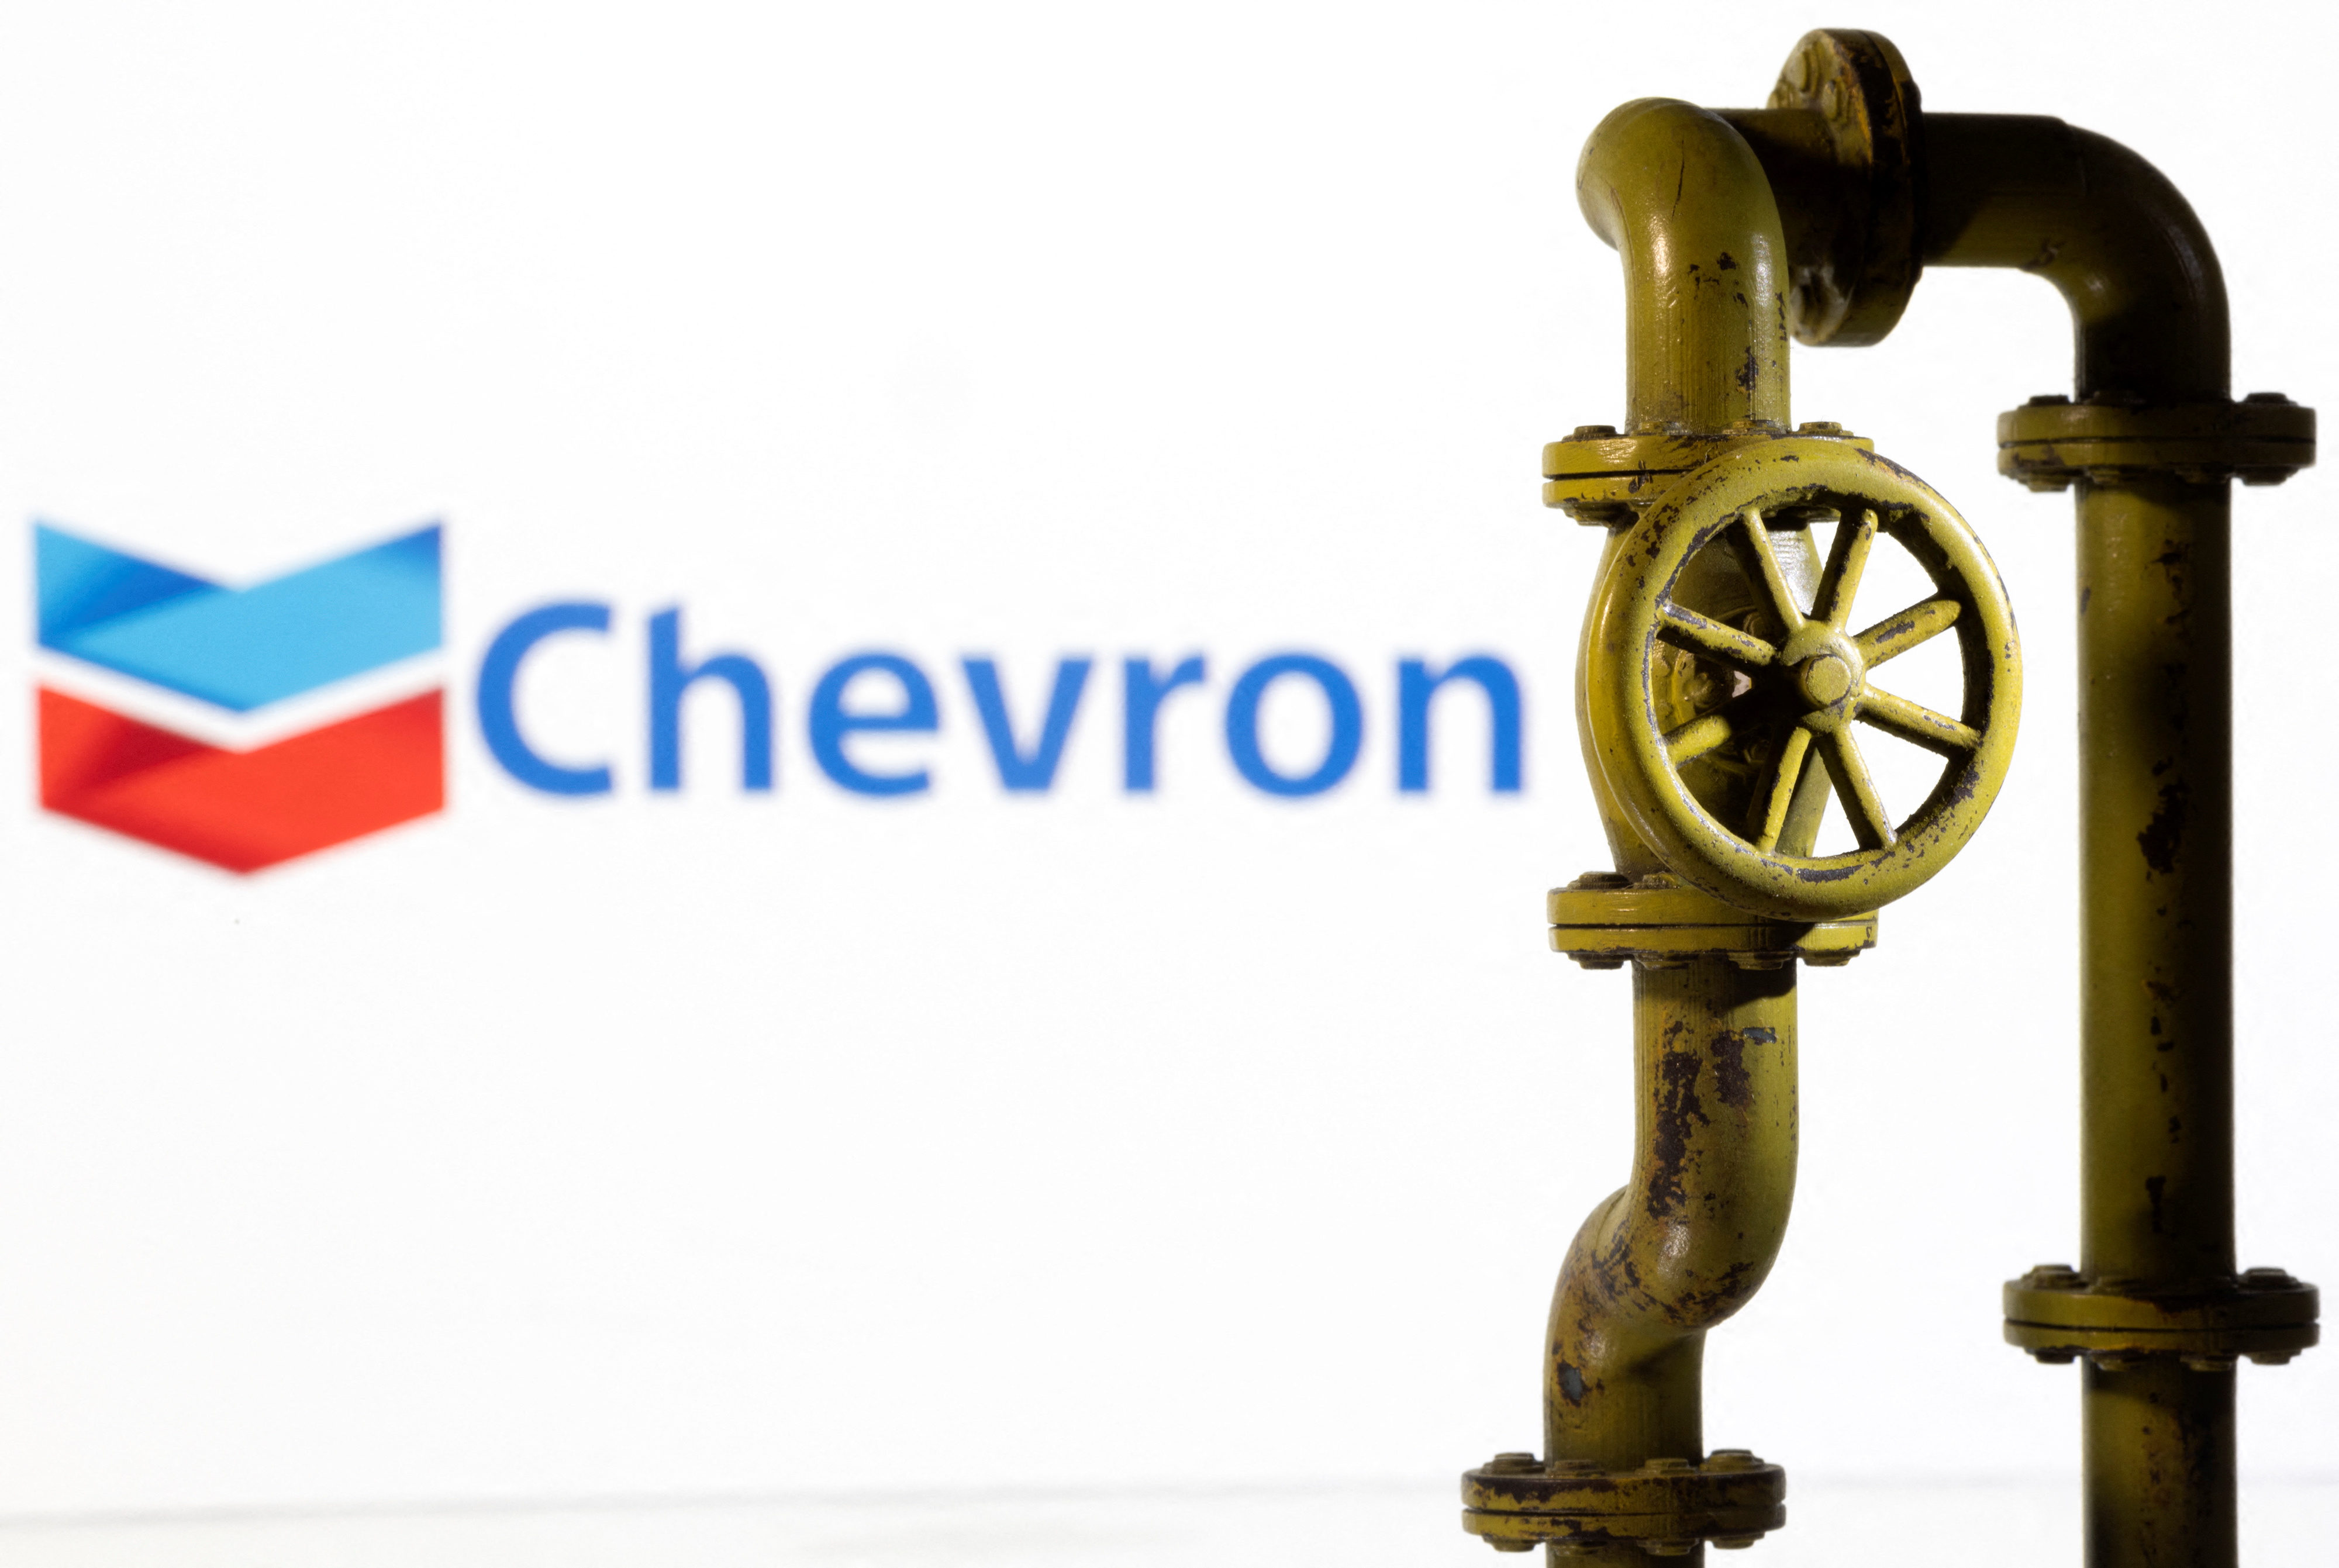 The illustration shows the chevron logo and the natural gas pipeline